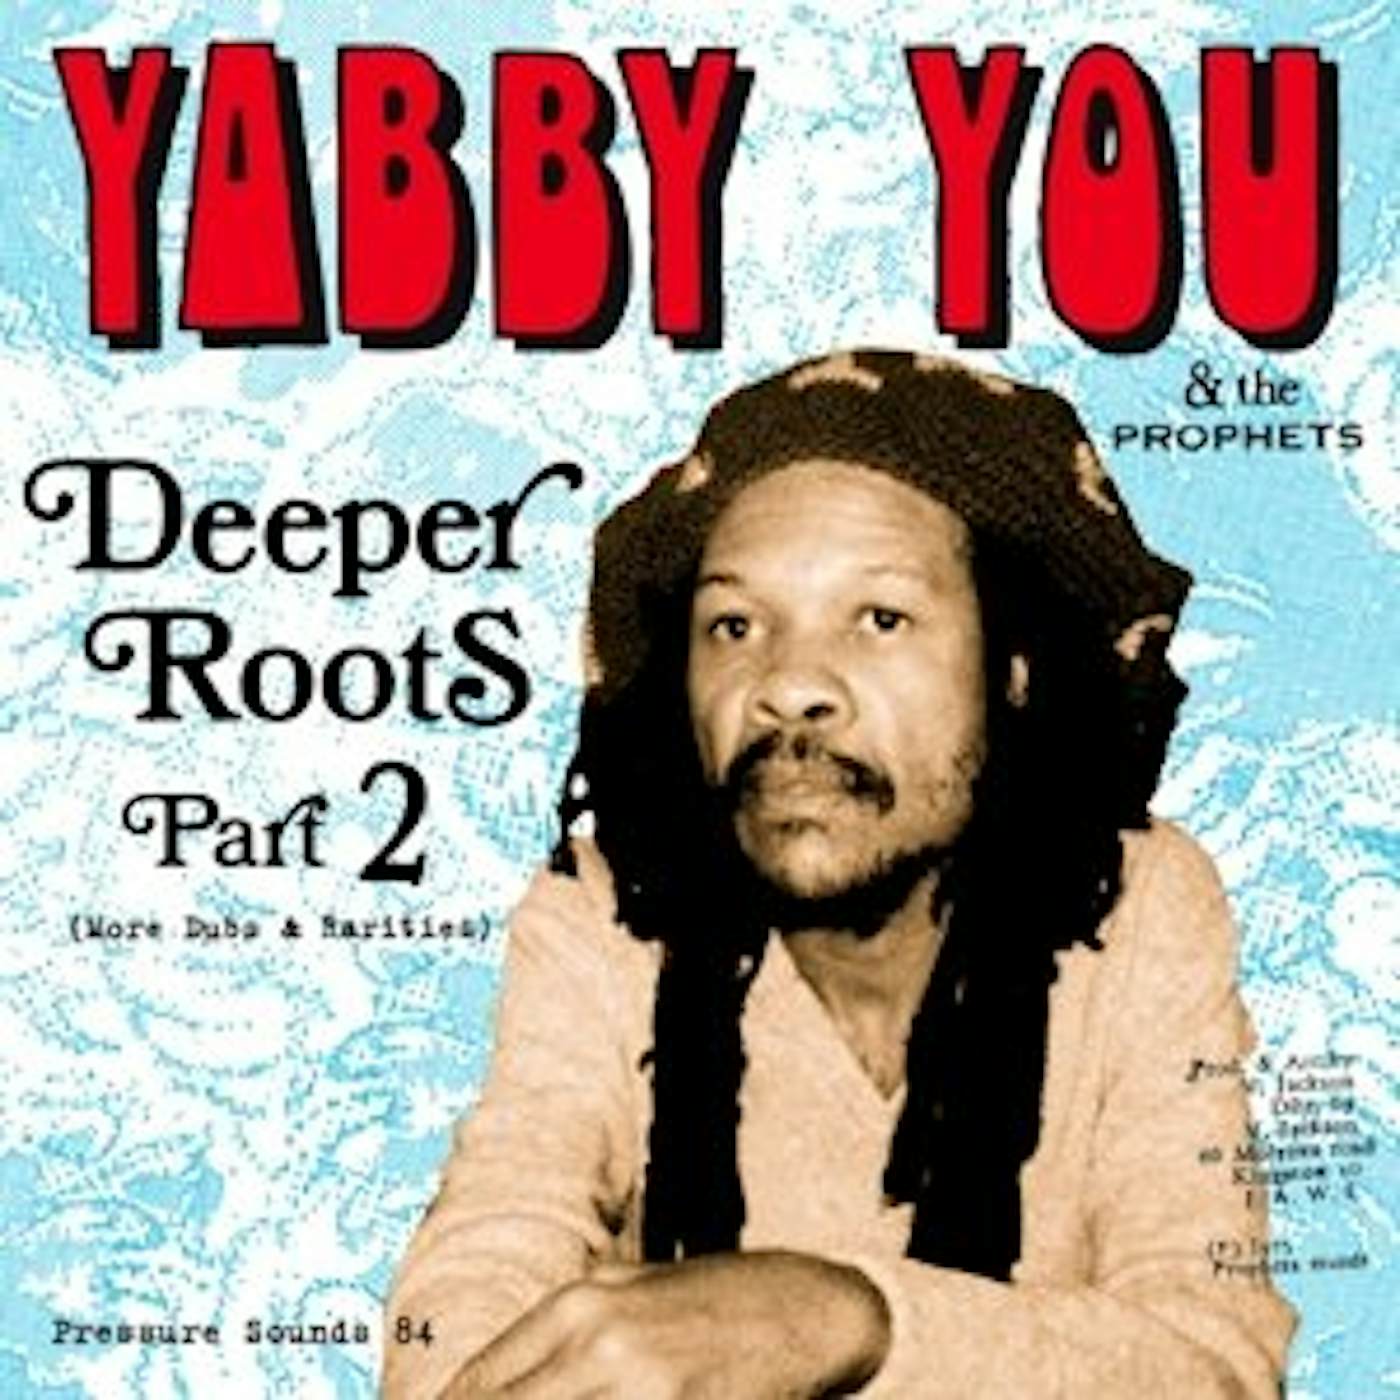 Yabby You DEEPER ROOTS PART 2 CD